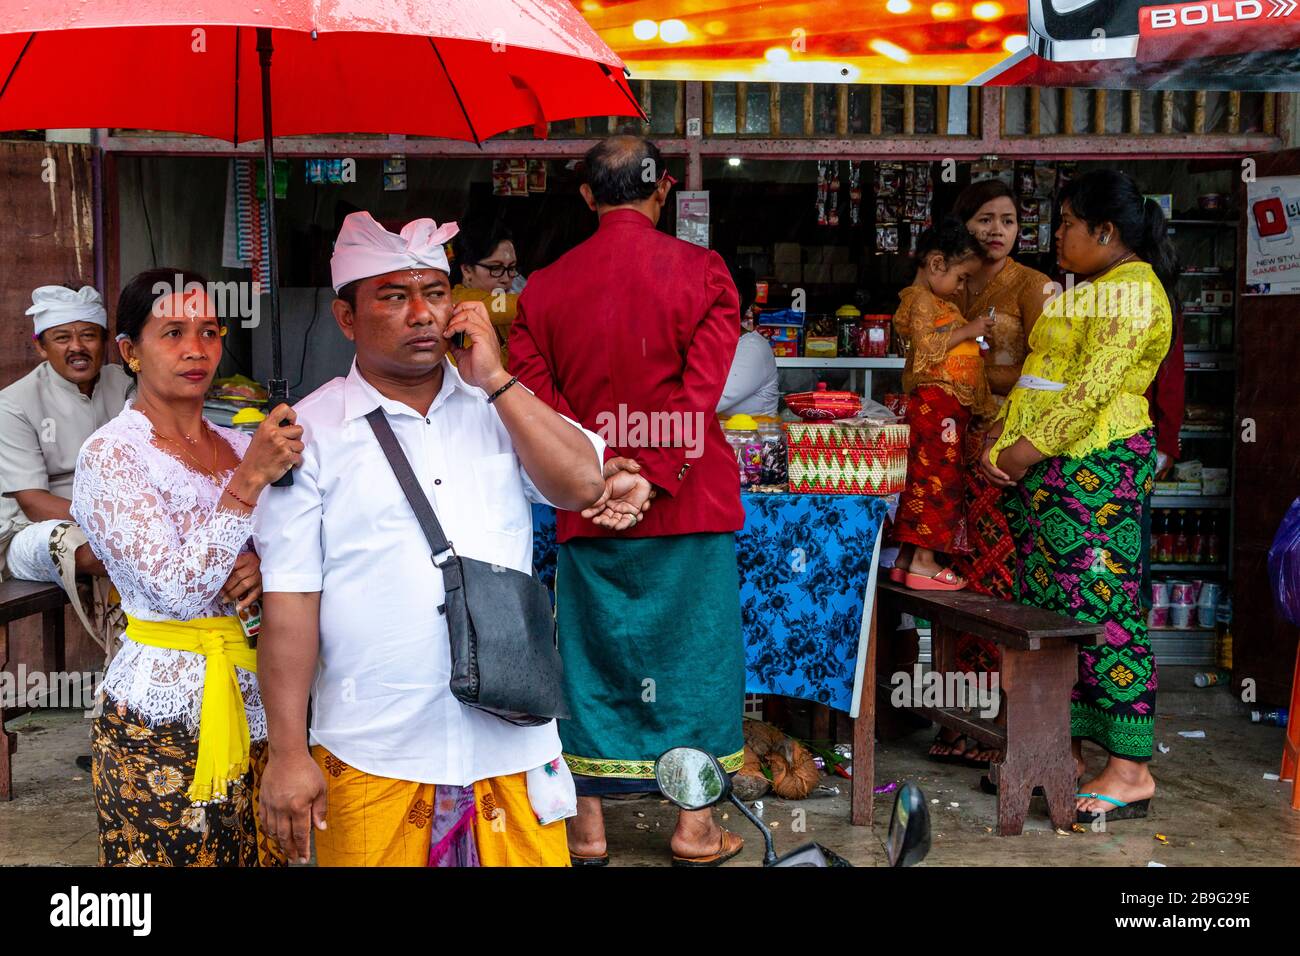 A Group Of Colourfully Dressed Balinese Hindu People Standing By A Street Food Stall During A Local Religious Festival, Ubud, Bali, Indonesia. Stock Photo